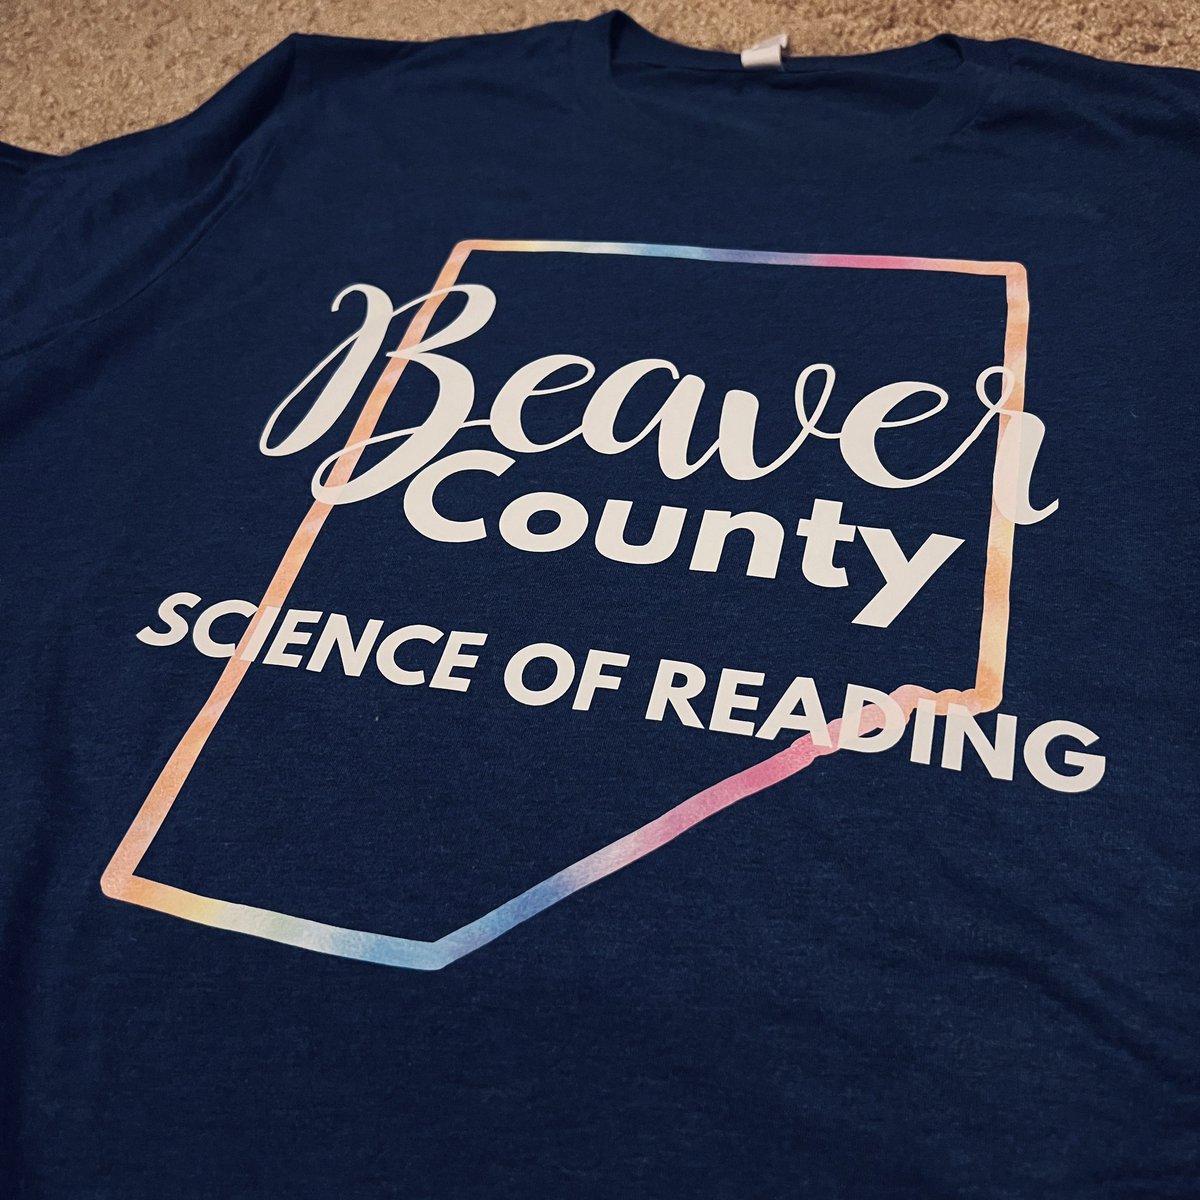 First shirt for our county group. 💙
#beavercountypa #scienceofreading #readingforall #untilALLcanread